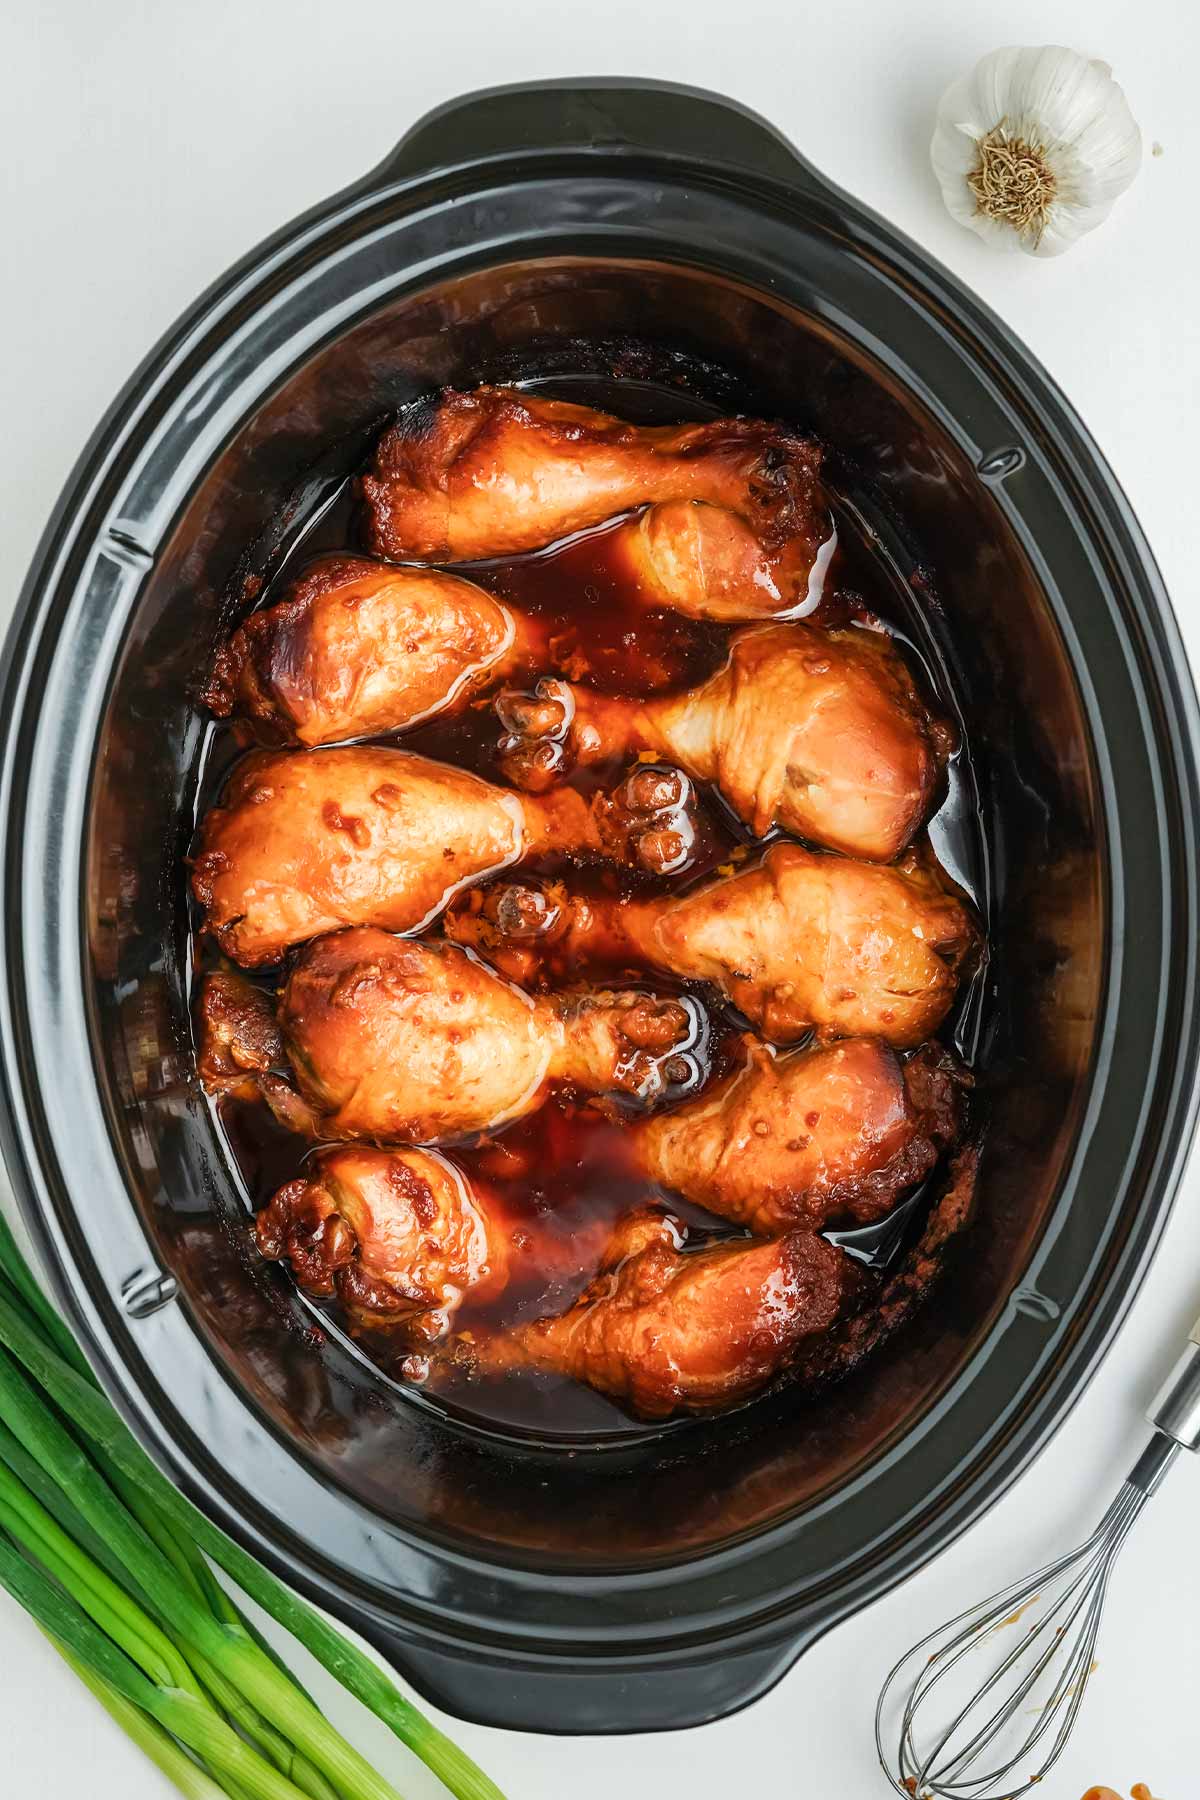 Cooked chicken drumsticks in the slow cooker done cooking.